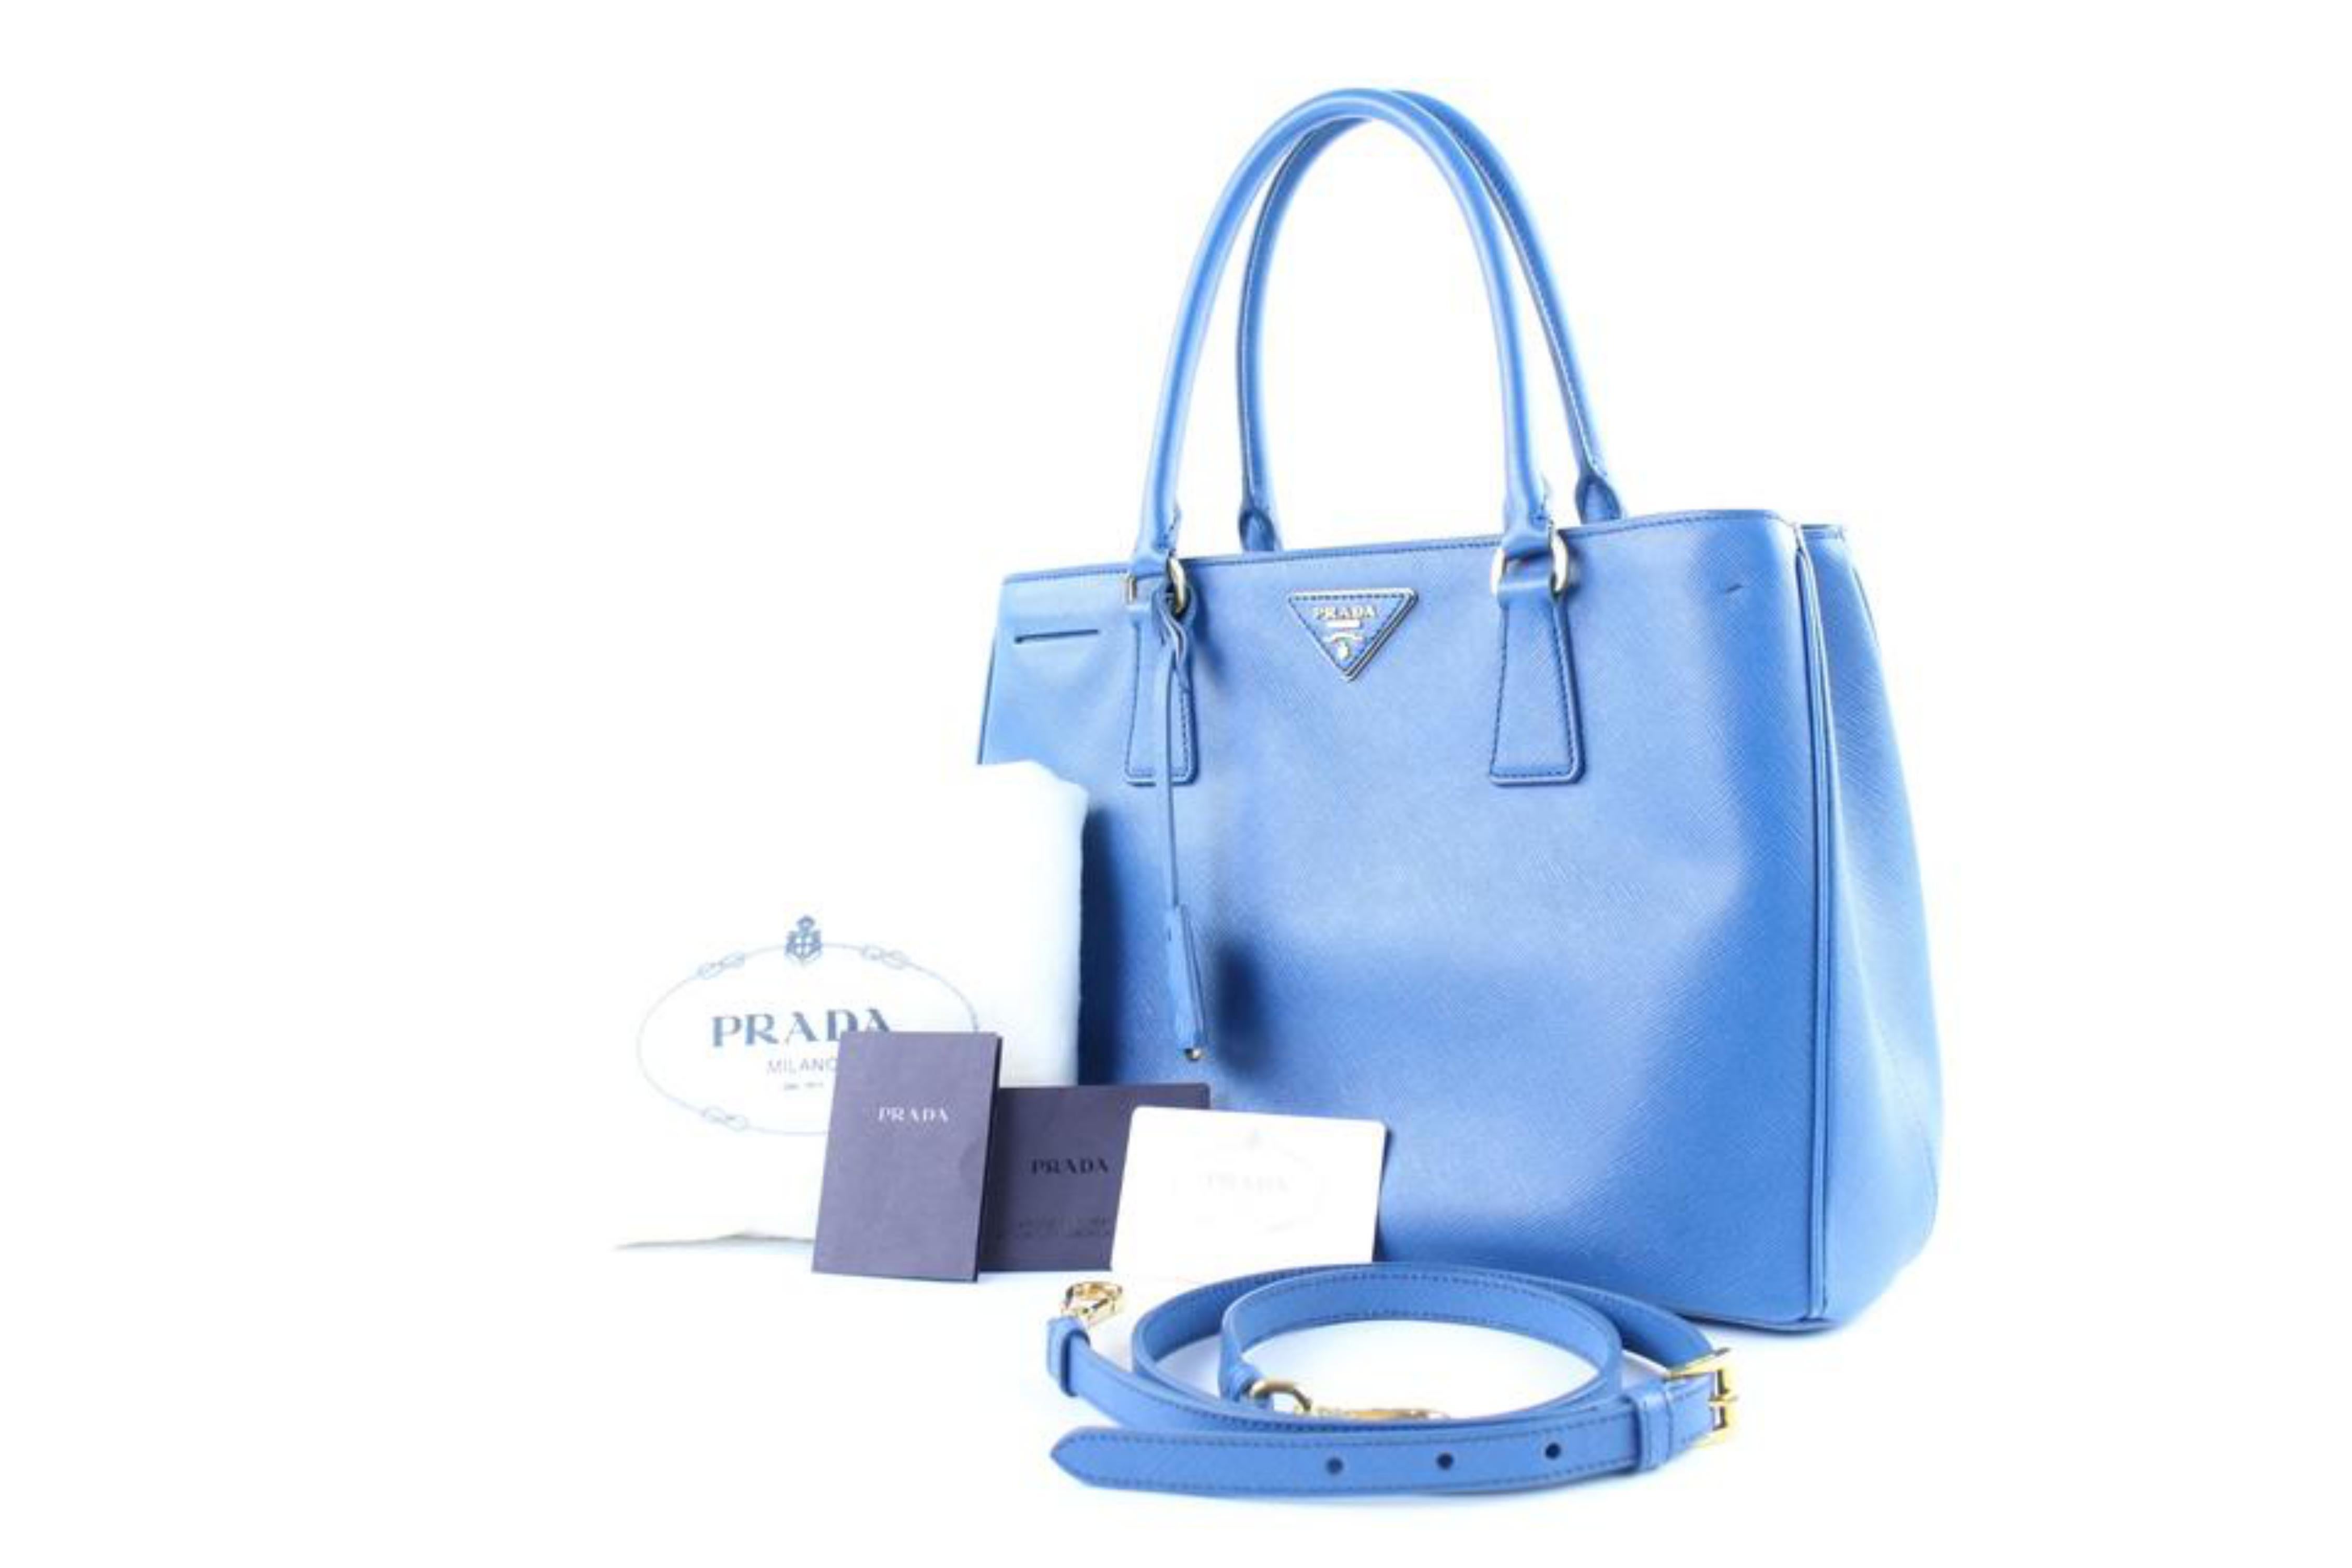 Size [inch]
*W:13.26in x H:8.97in x D:5.85in
Size [cm]
*W:34cm x H:23cm x D:15cm
OVERALL EXCELLENT- CONDITION
( 8.5/10 or A- )
Includes Prada Dust Bag, Removable Strap, Authenticity Card, Envelope and Everything Shown
Retail $2390
Signs of Wear: